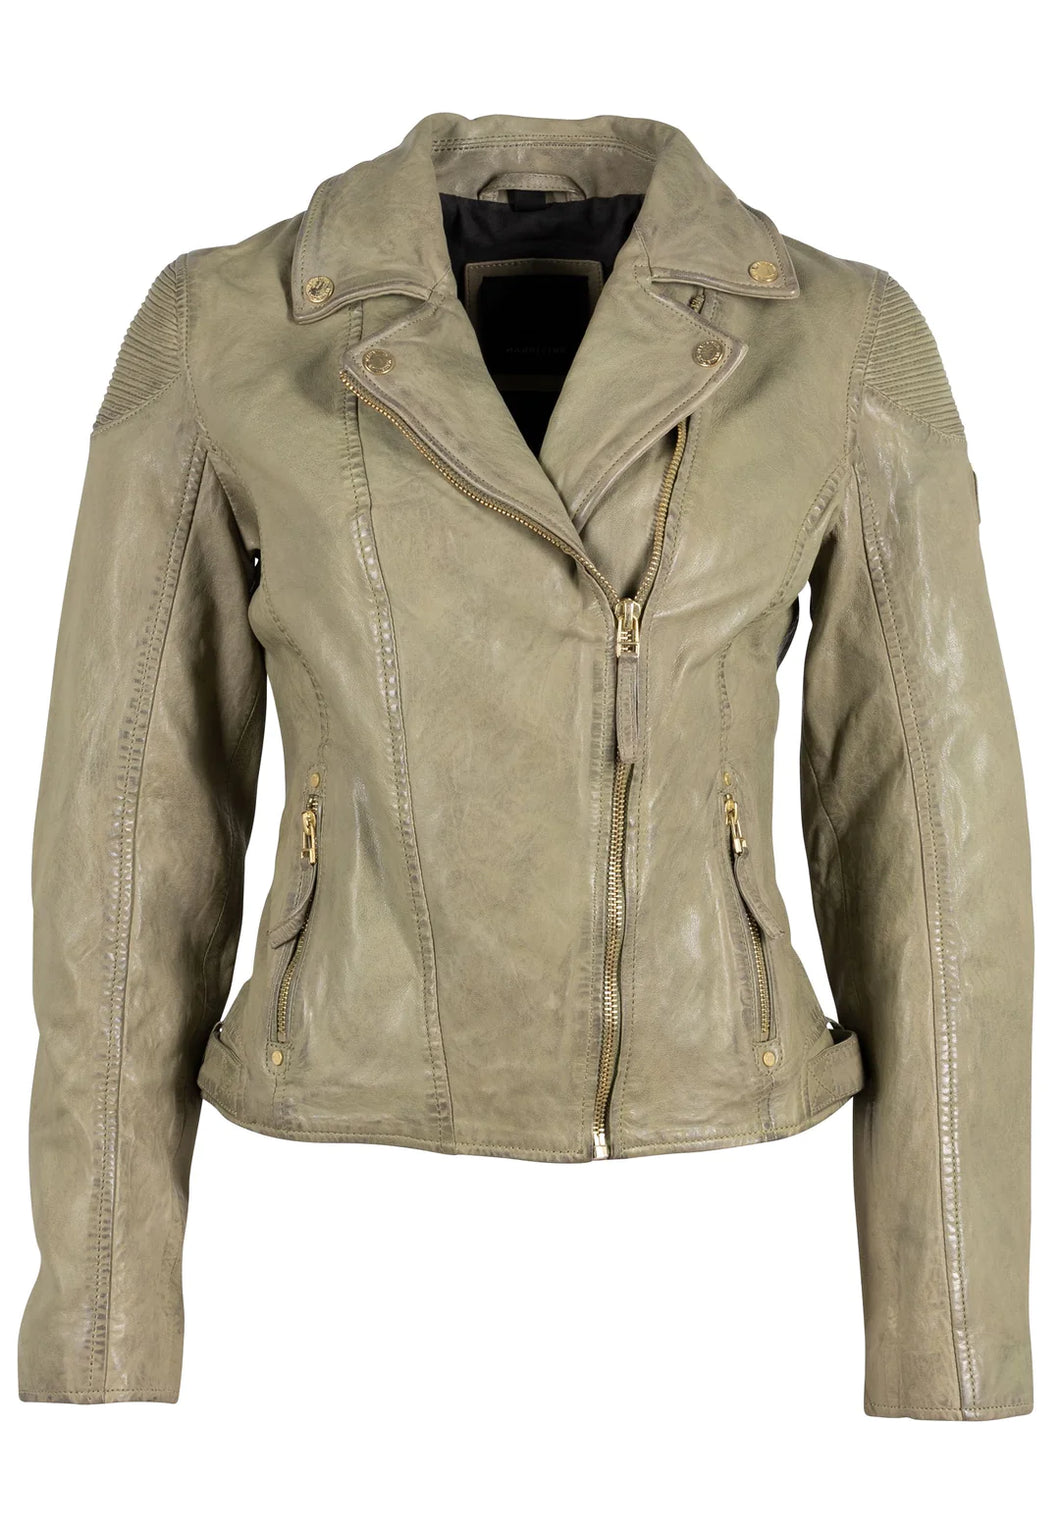 mauritius leather jacket in sage at west2westport.com